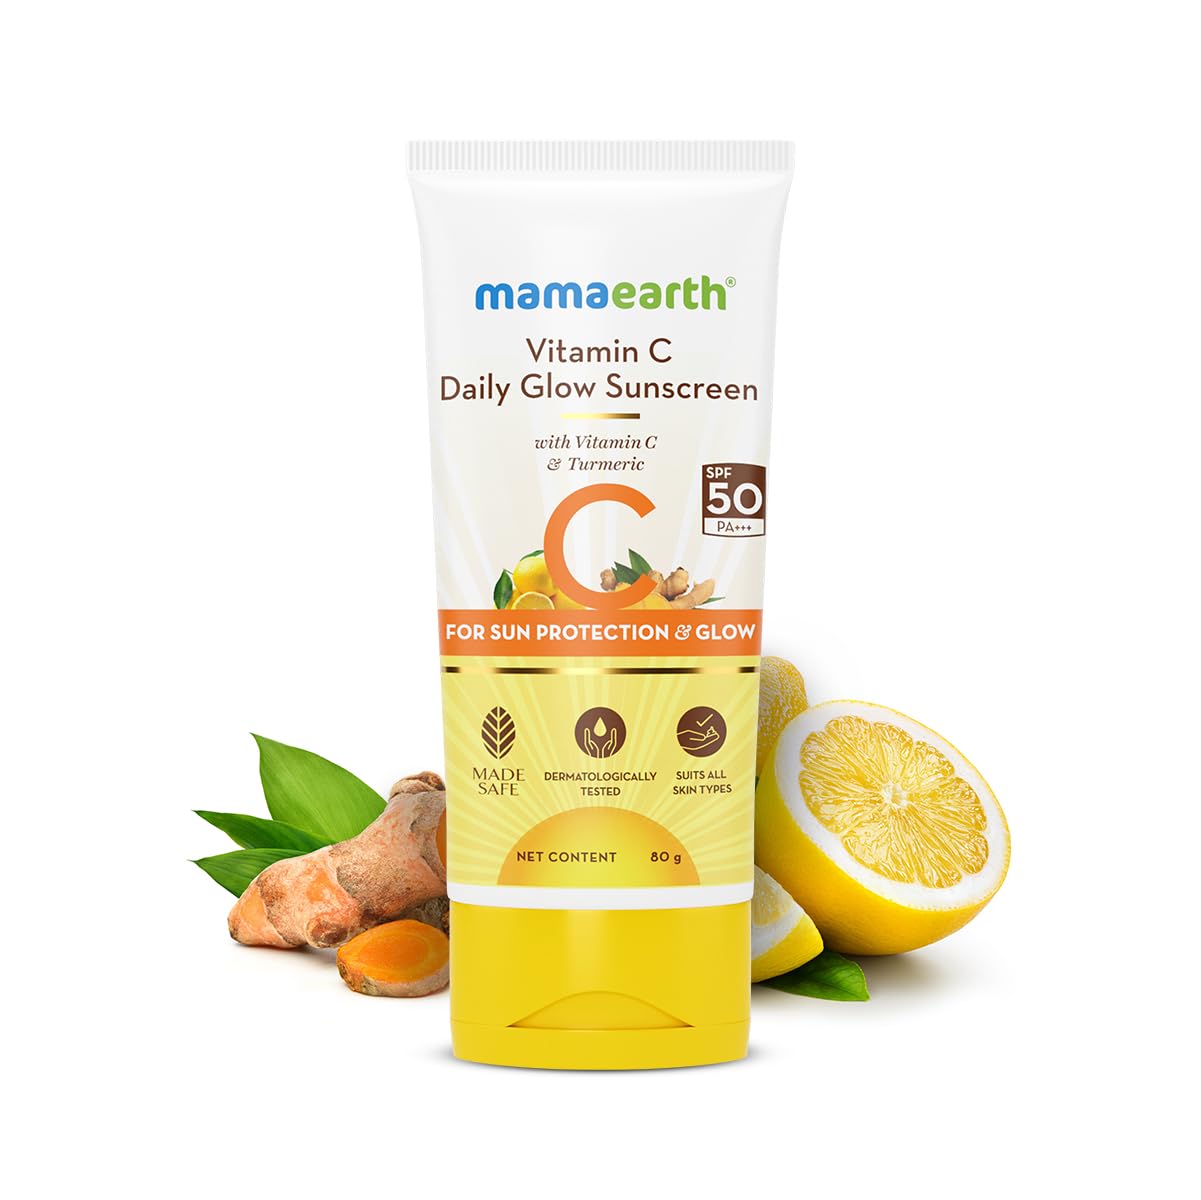 Mamaearth Vitamin C Daily Glow Sunscreen For All Skin Types Spf 50 Pa+++ | No White Cast With Vitamin C & Turmeric, Lightweight, For Sun Protection & Glow - 80 G, Pack Of 1